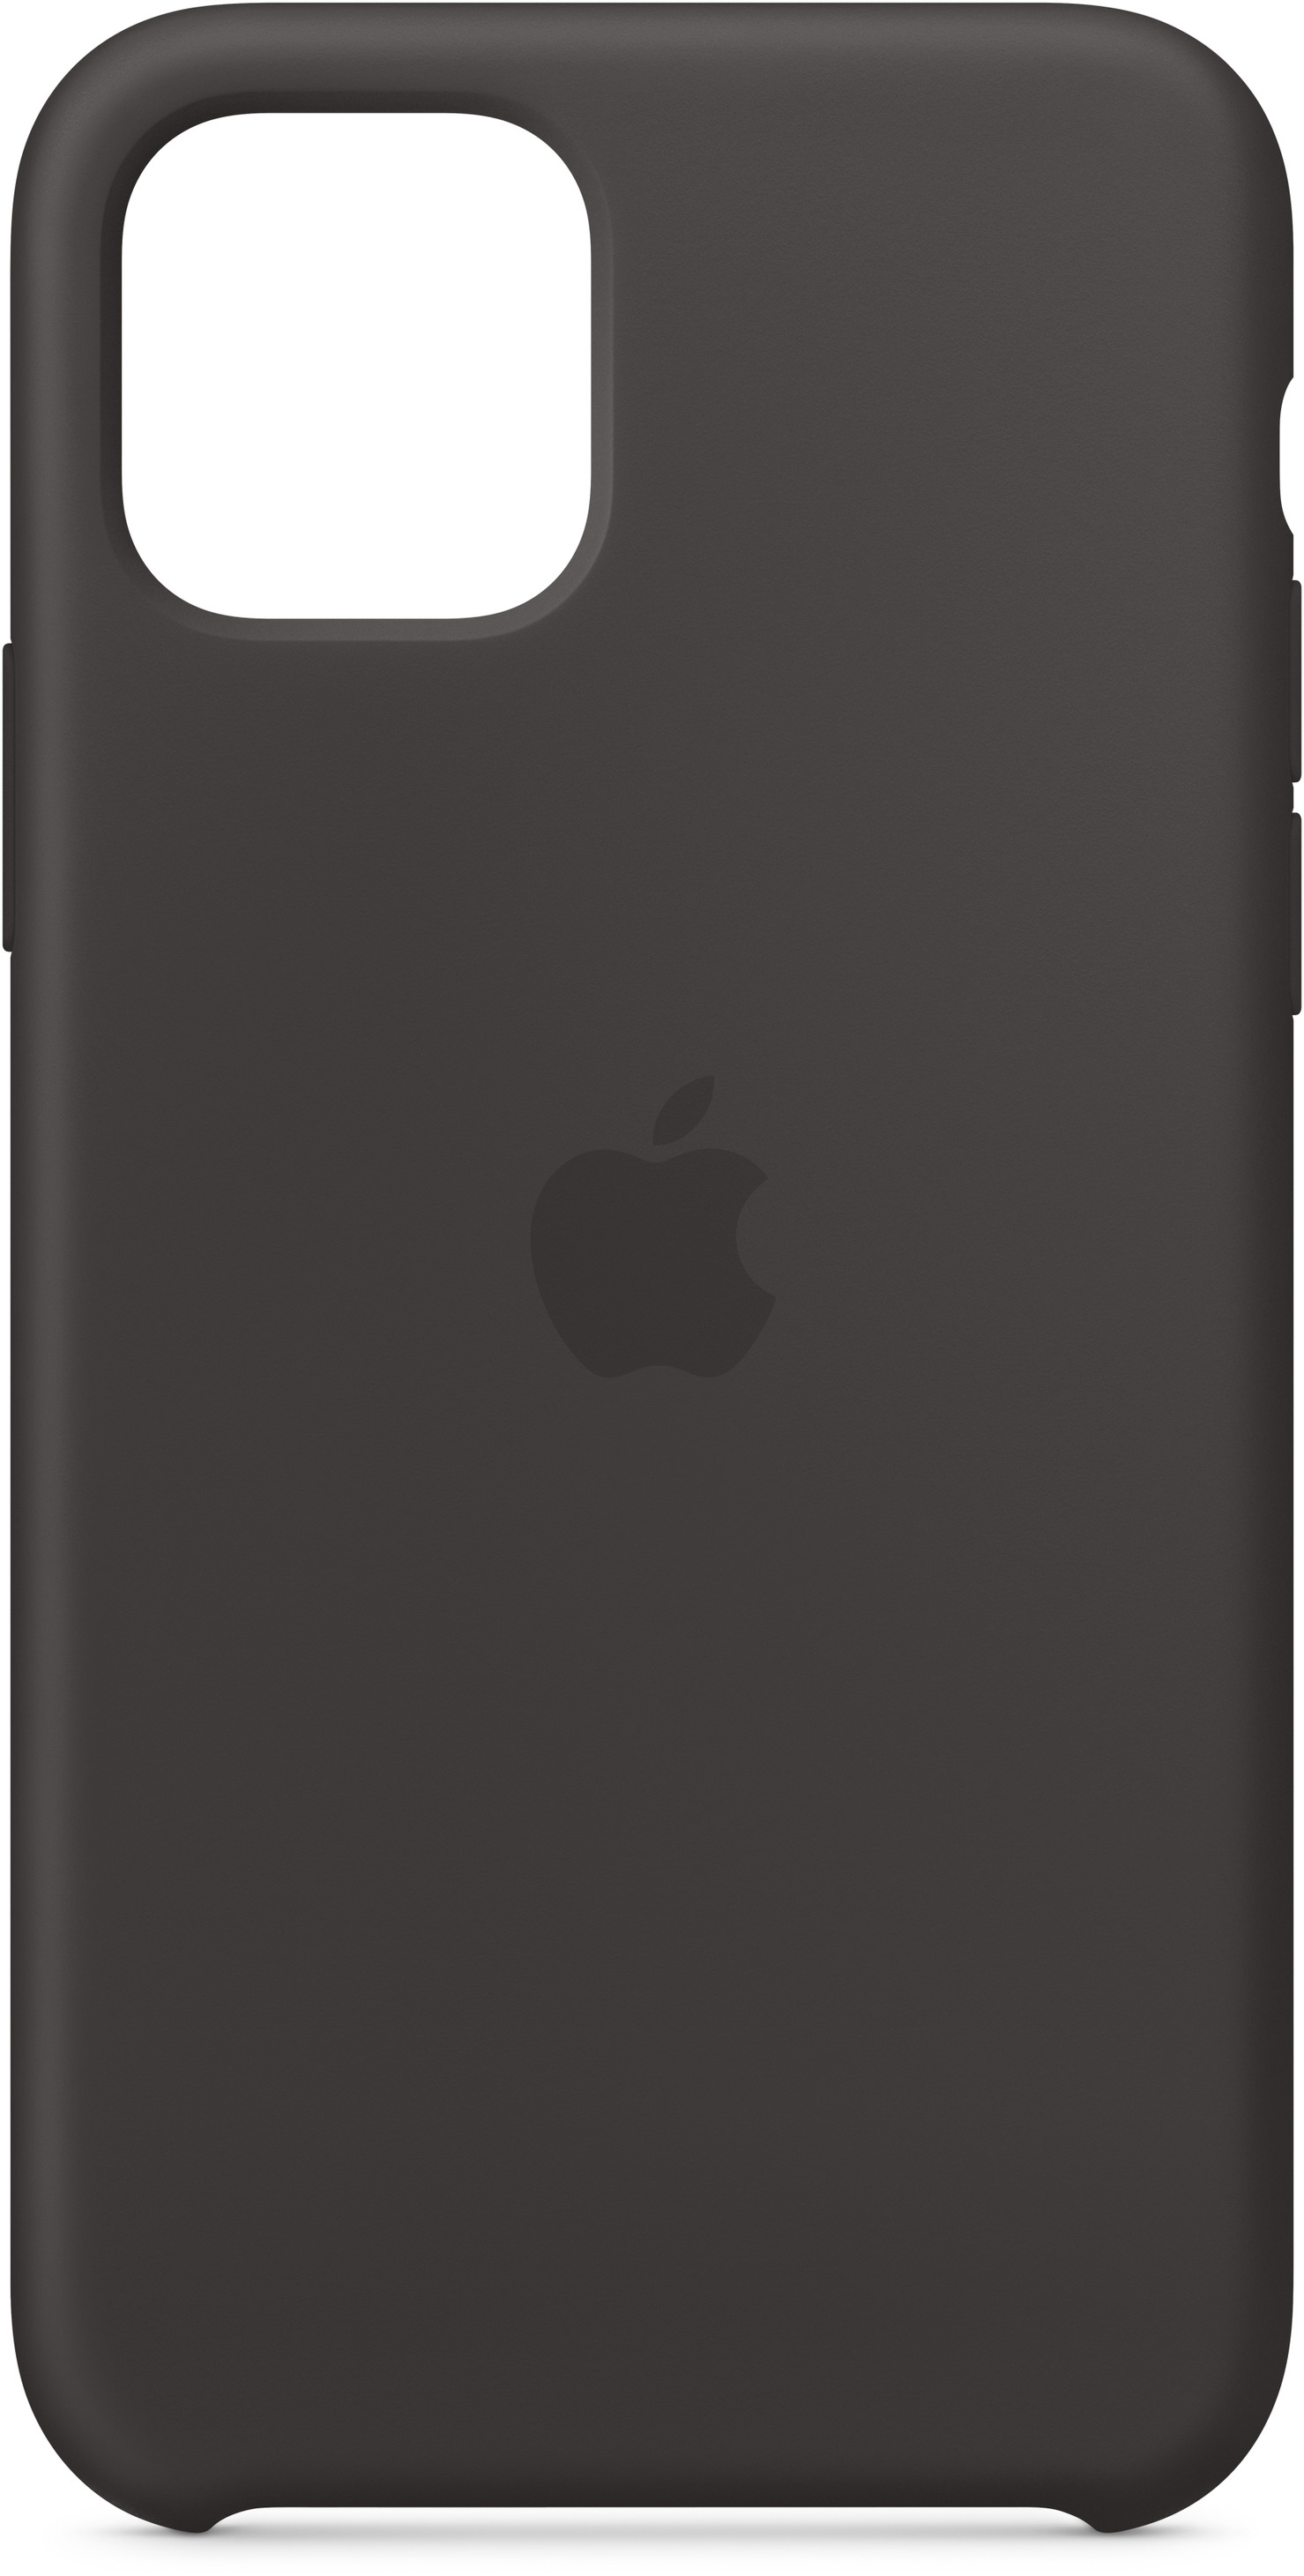 iPhone Backcover, APPLE Silicone Schwarz Case, Pro, 11 Apple,